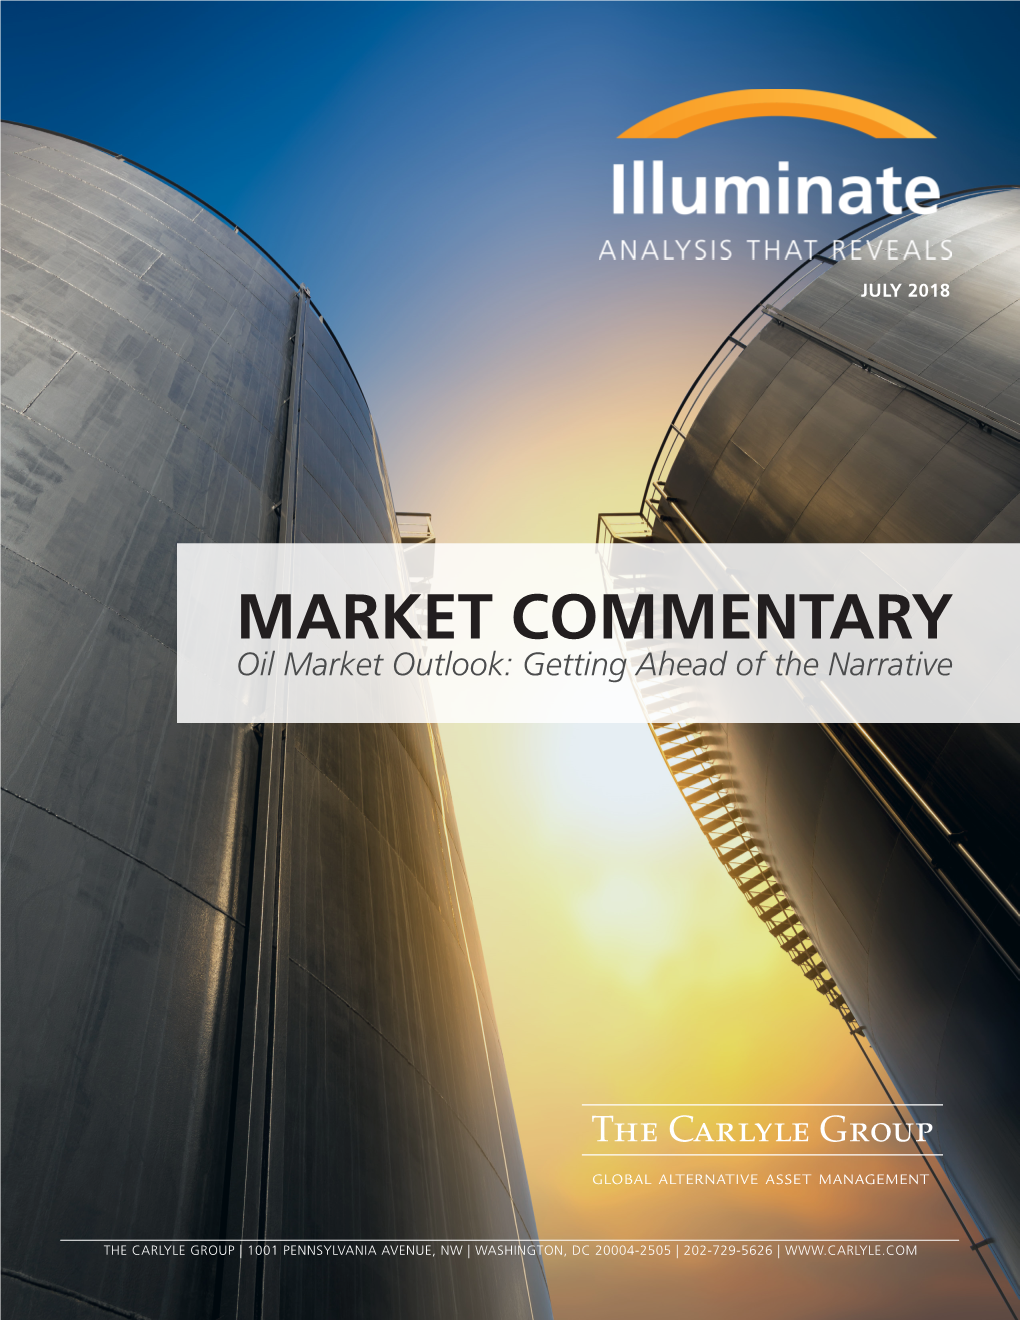 MARKET COMMENTARY Oil Market Outlook: Getting Ahead of the Narrative